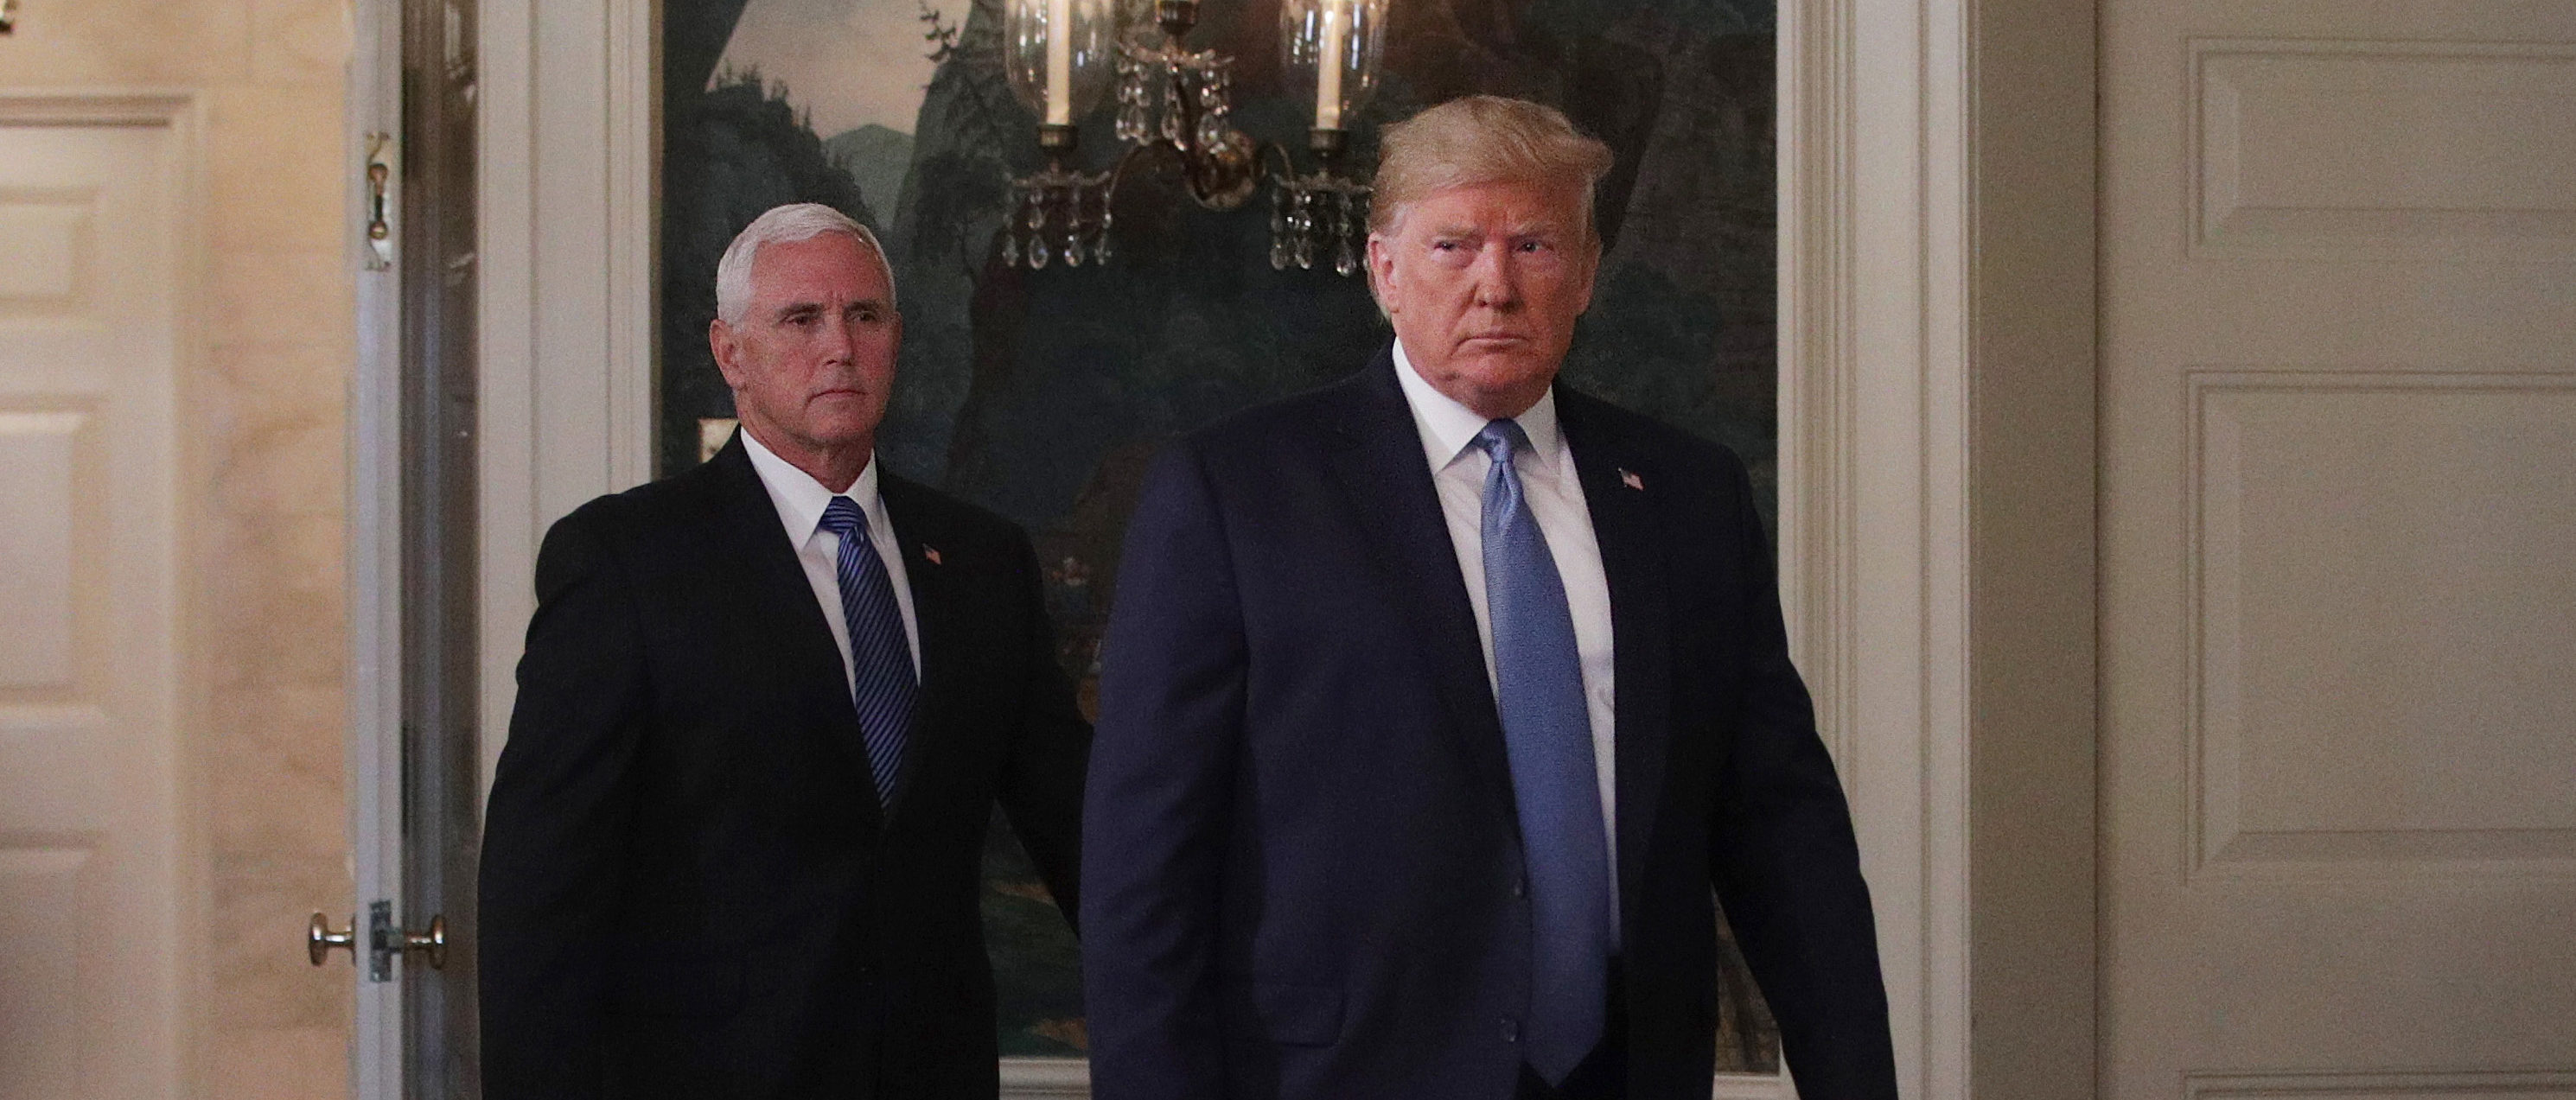 WASHINGTON, DC - AUGUST 05: U.S. President Donald Trump and Vice President Mike Pence enter the Diplomatic Reception Room of the White House to make remarks August 5, 2019 in Washington, DC. President Trump delivered remarks on the mass shootings in El Paso, Texas, and Dayton, Ohio, over the weekend. (Photo by Alex Wong/Getty Images)